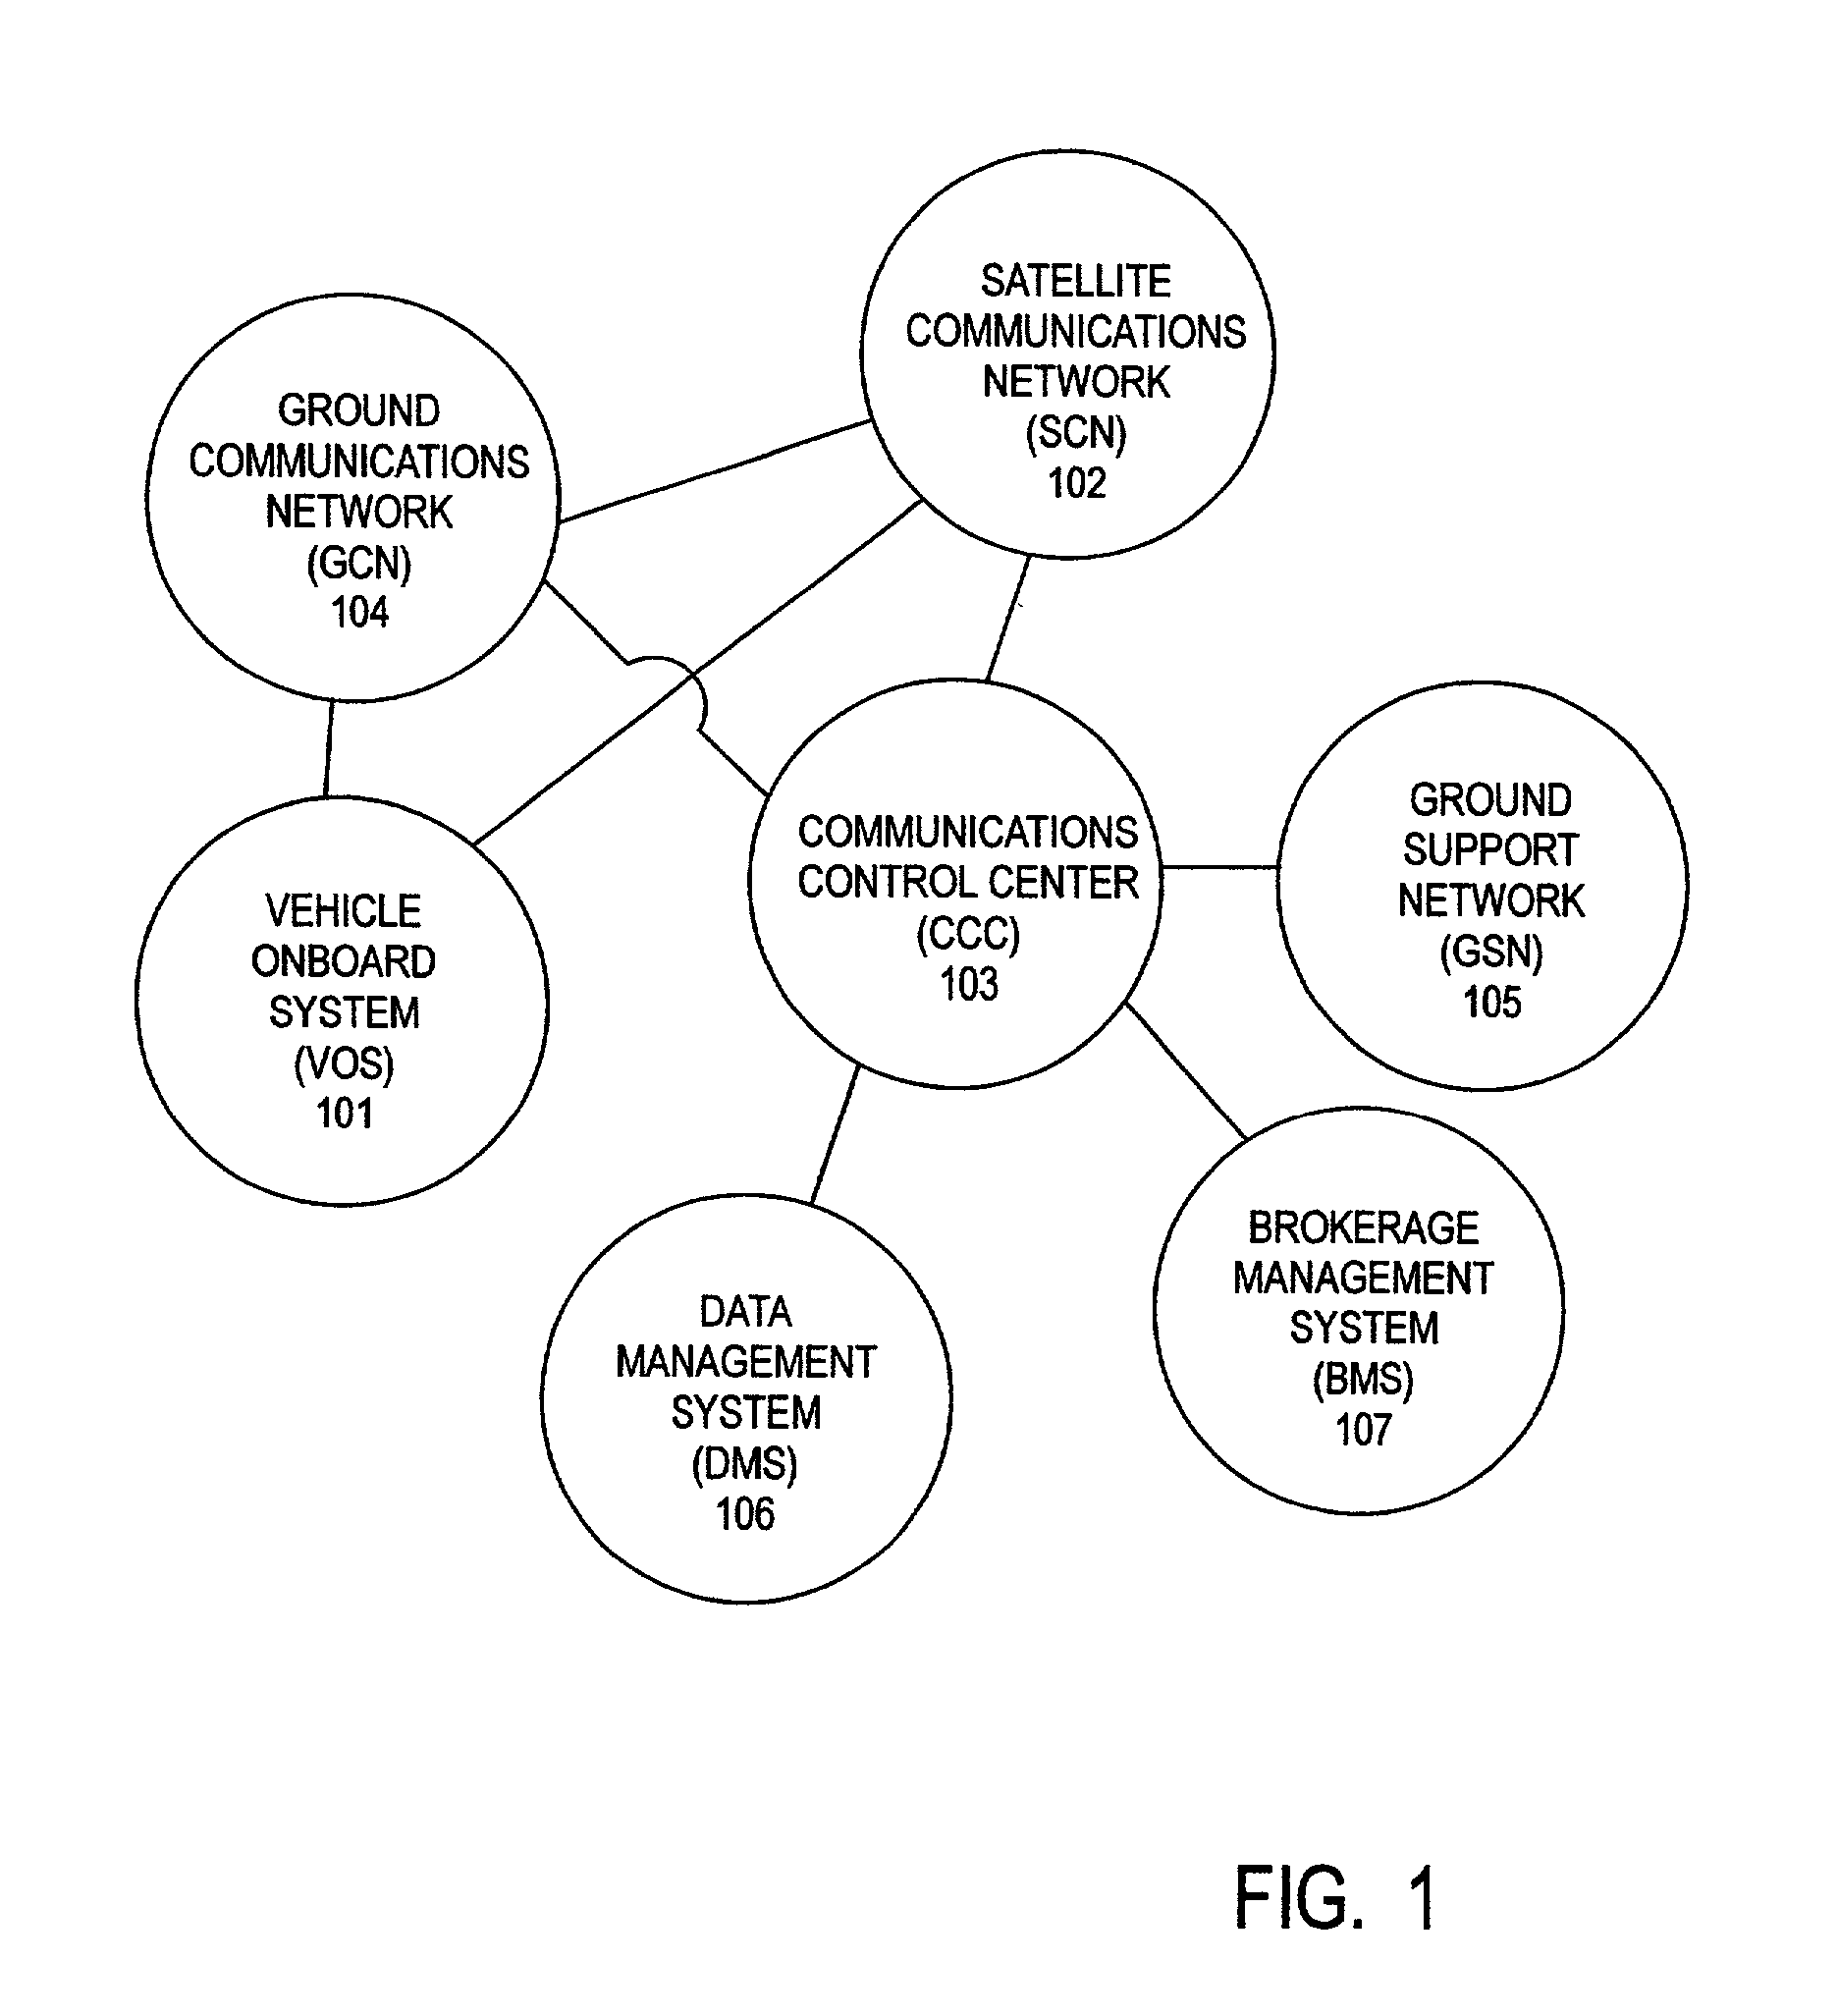 Land vehicle communications system and process for providing information and coordinating vehicle activities